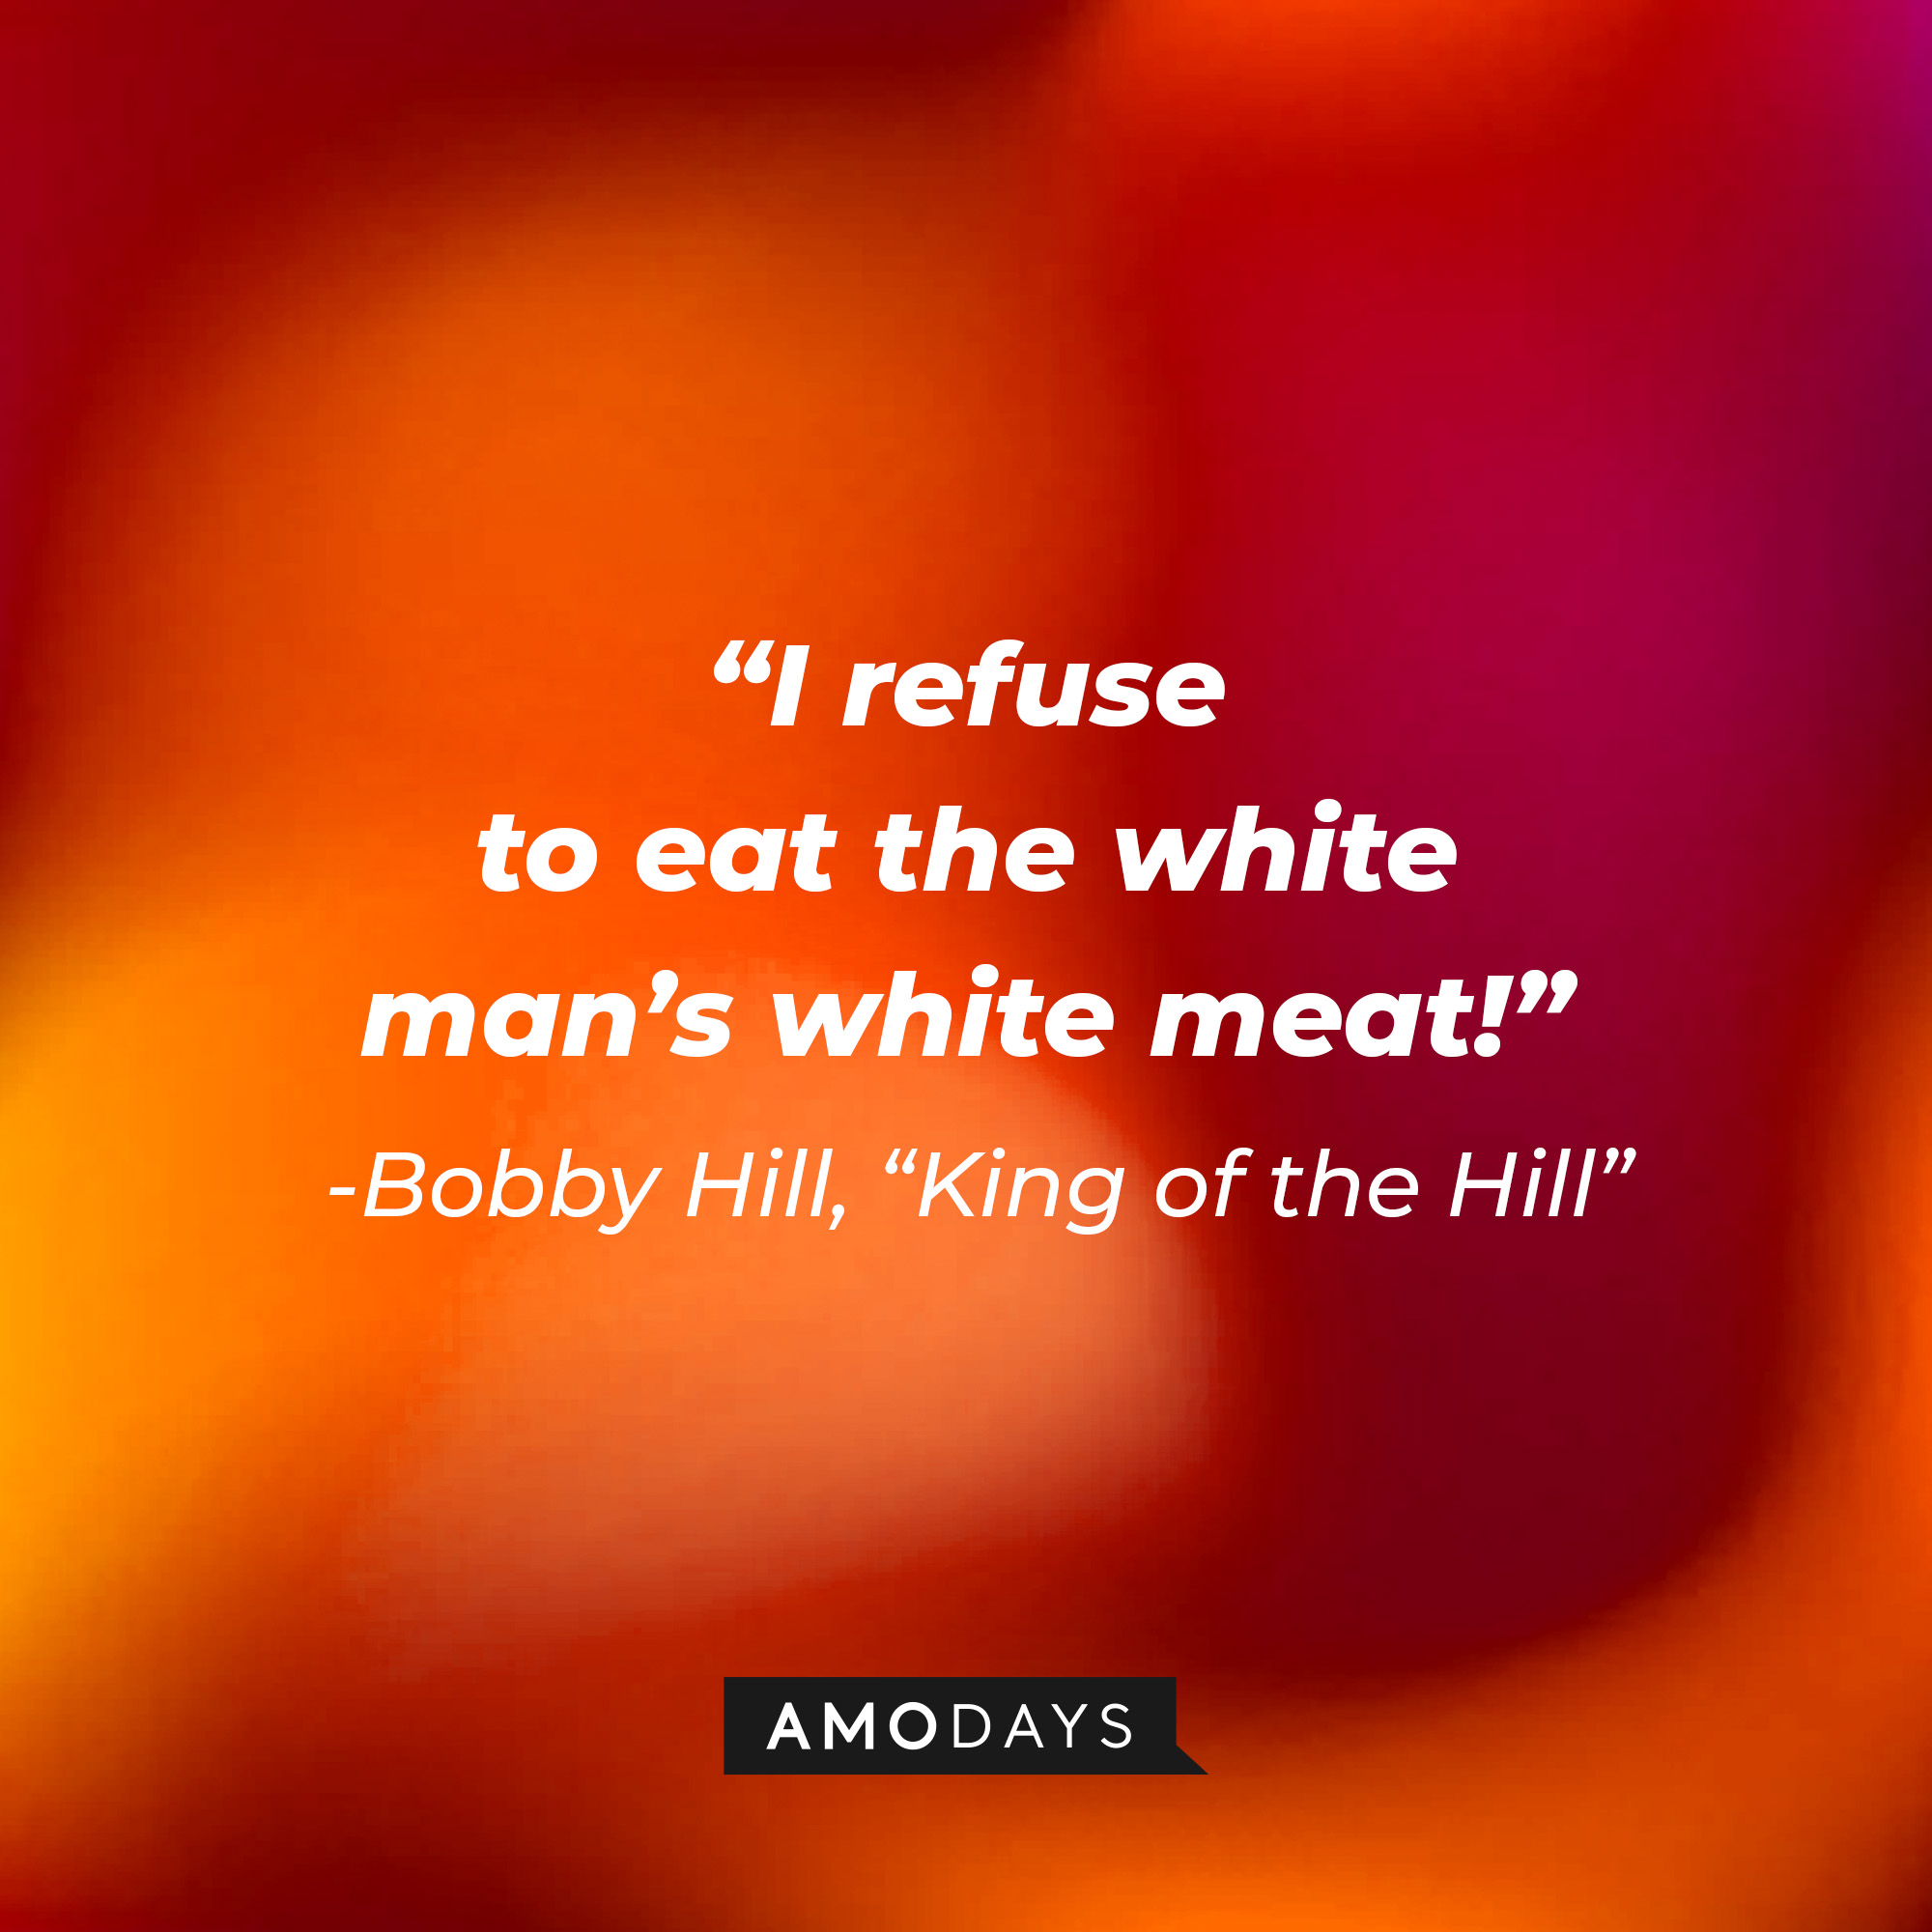 Bobby Hill with his quote, "I refuse to eat the white man’s white meat!" | Source: facebook.com/kingofthehillfan